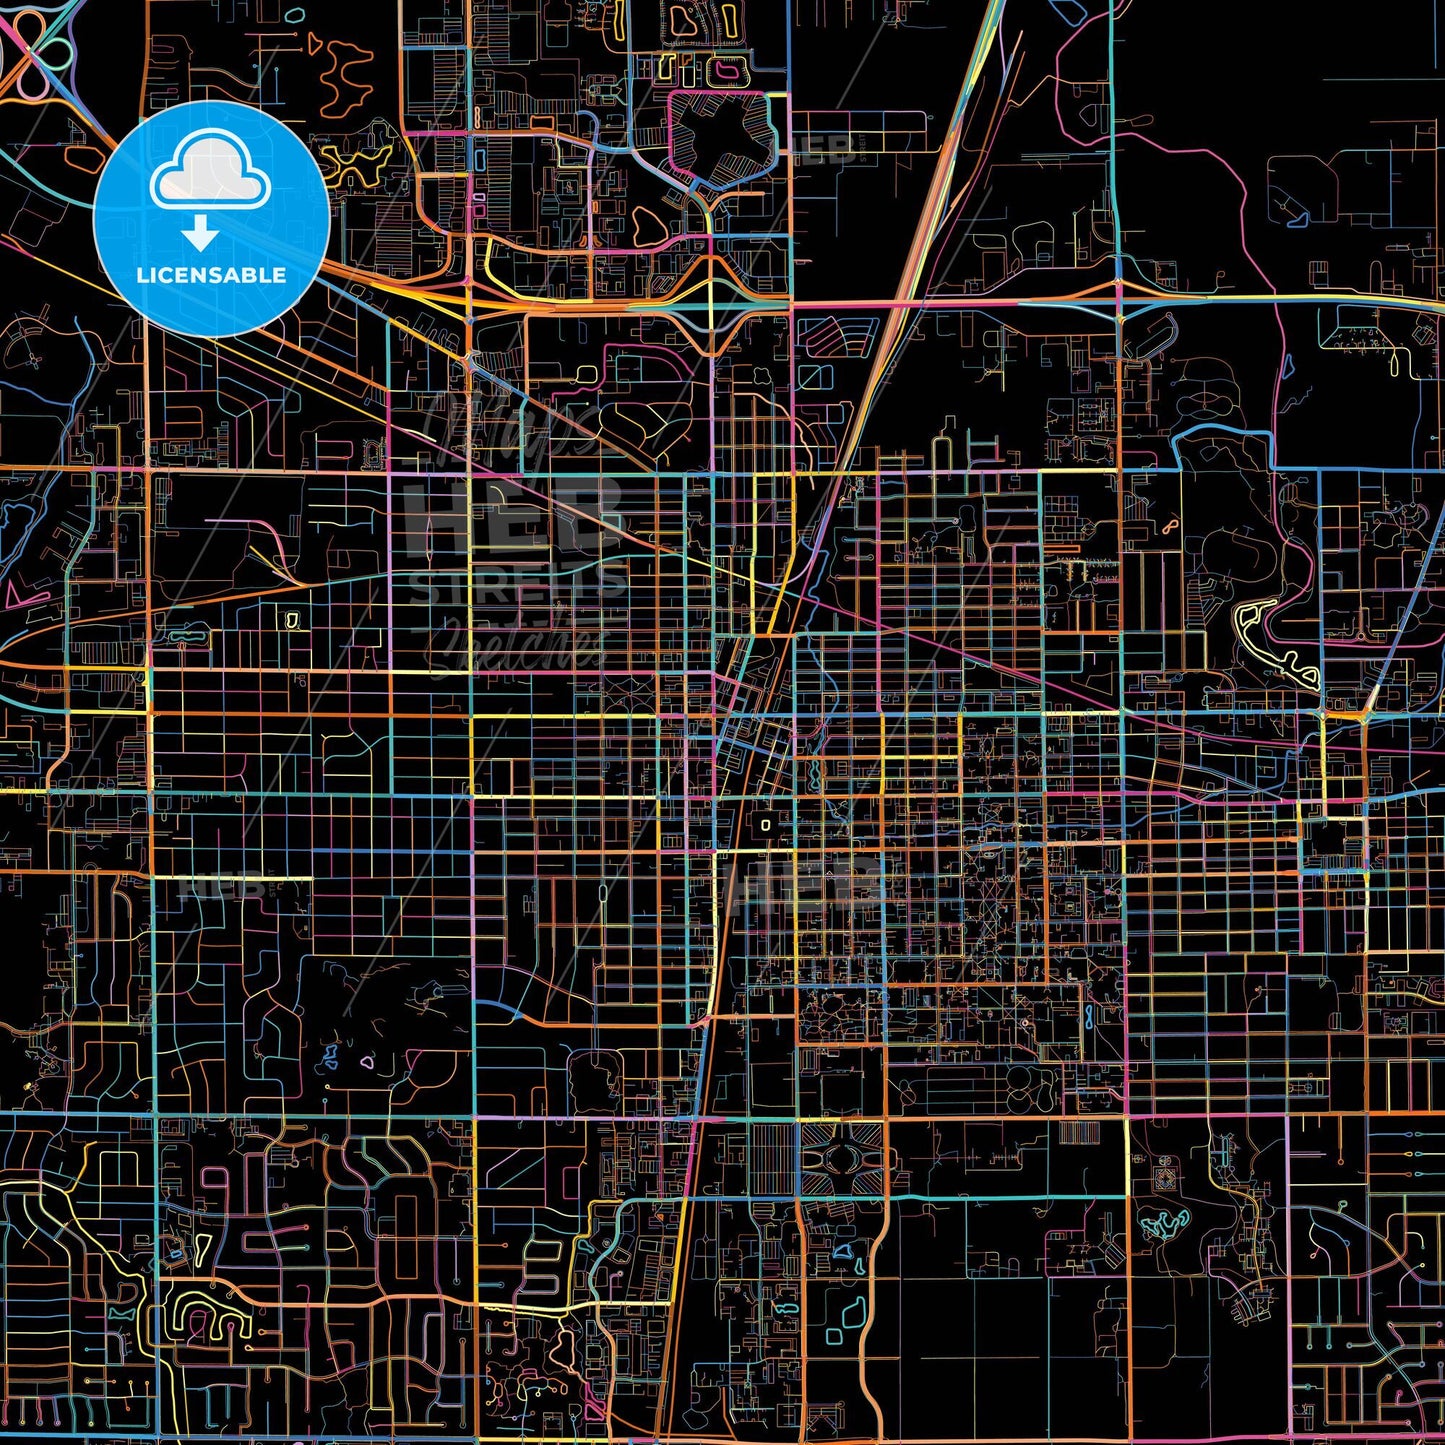 Champaign, Illinois, United States, colorful city map on black background